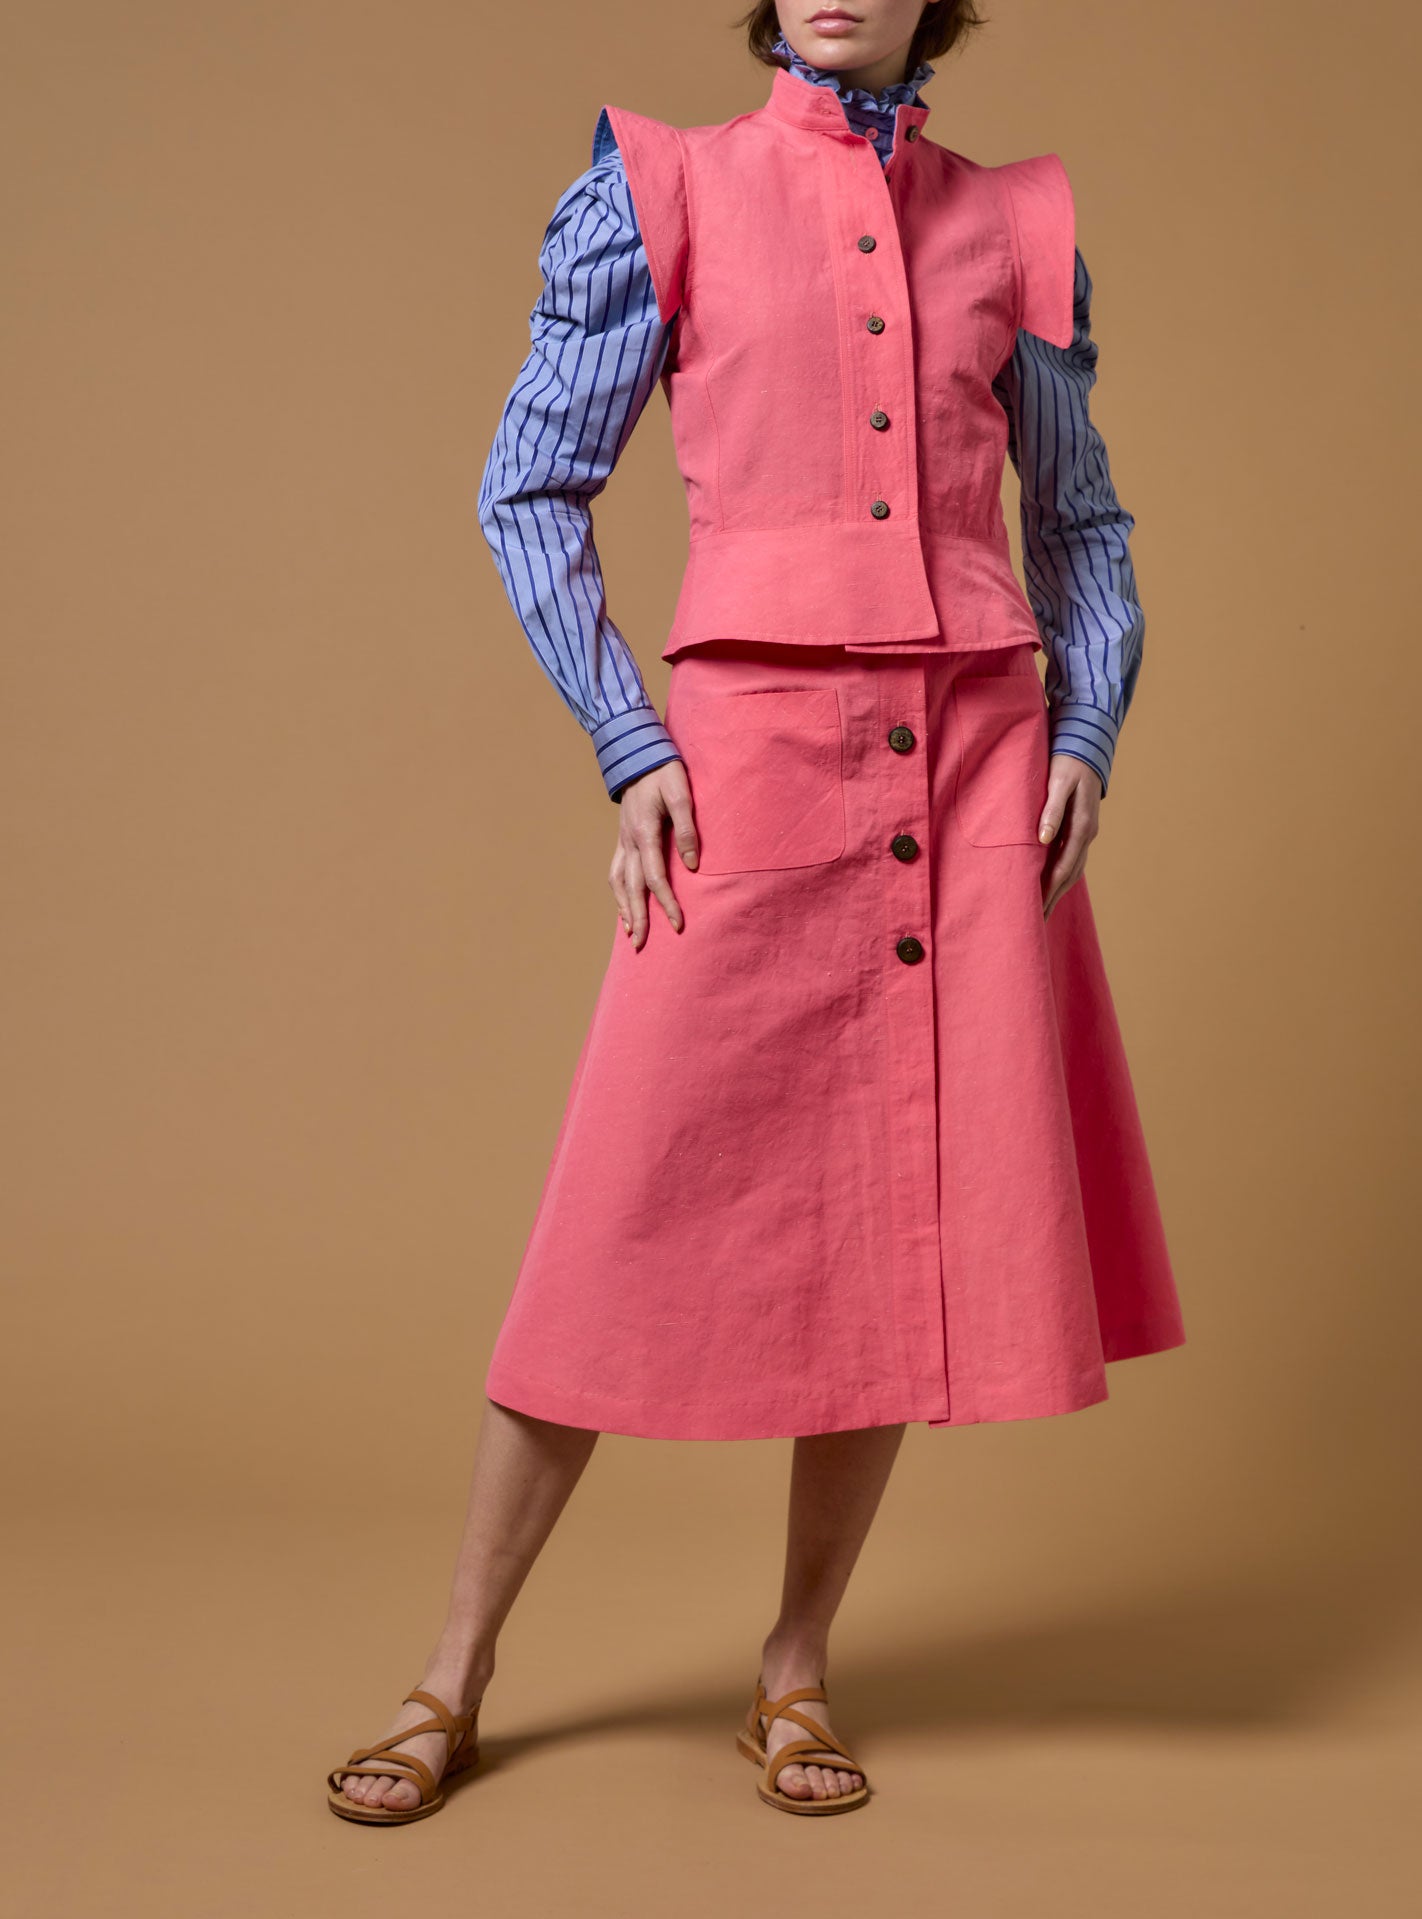 Large view of Yael The Gentle Gardener Bubblegum lining Bluet Jacket with a Yardley skirt by Thierry Colson